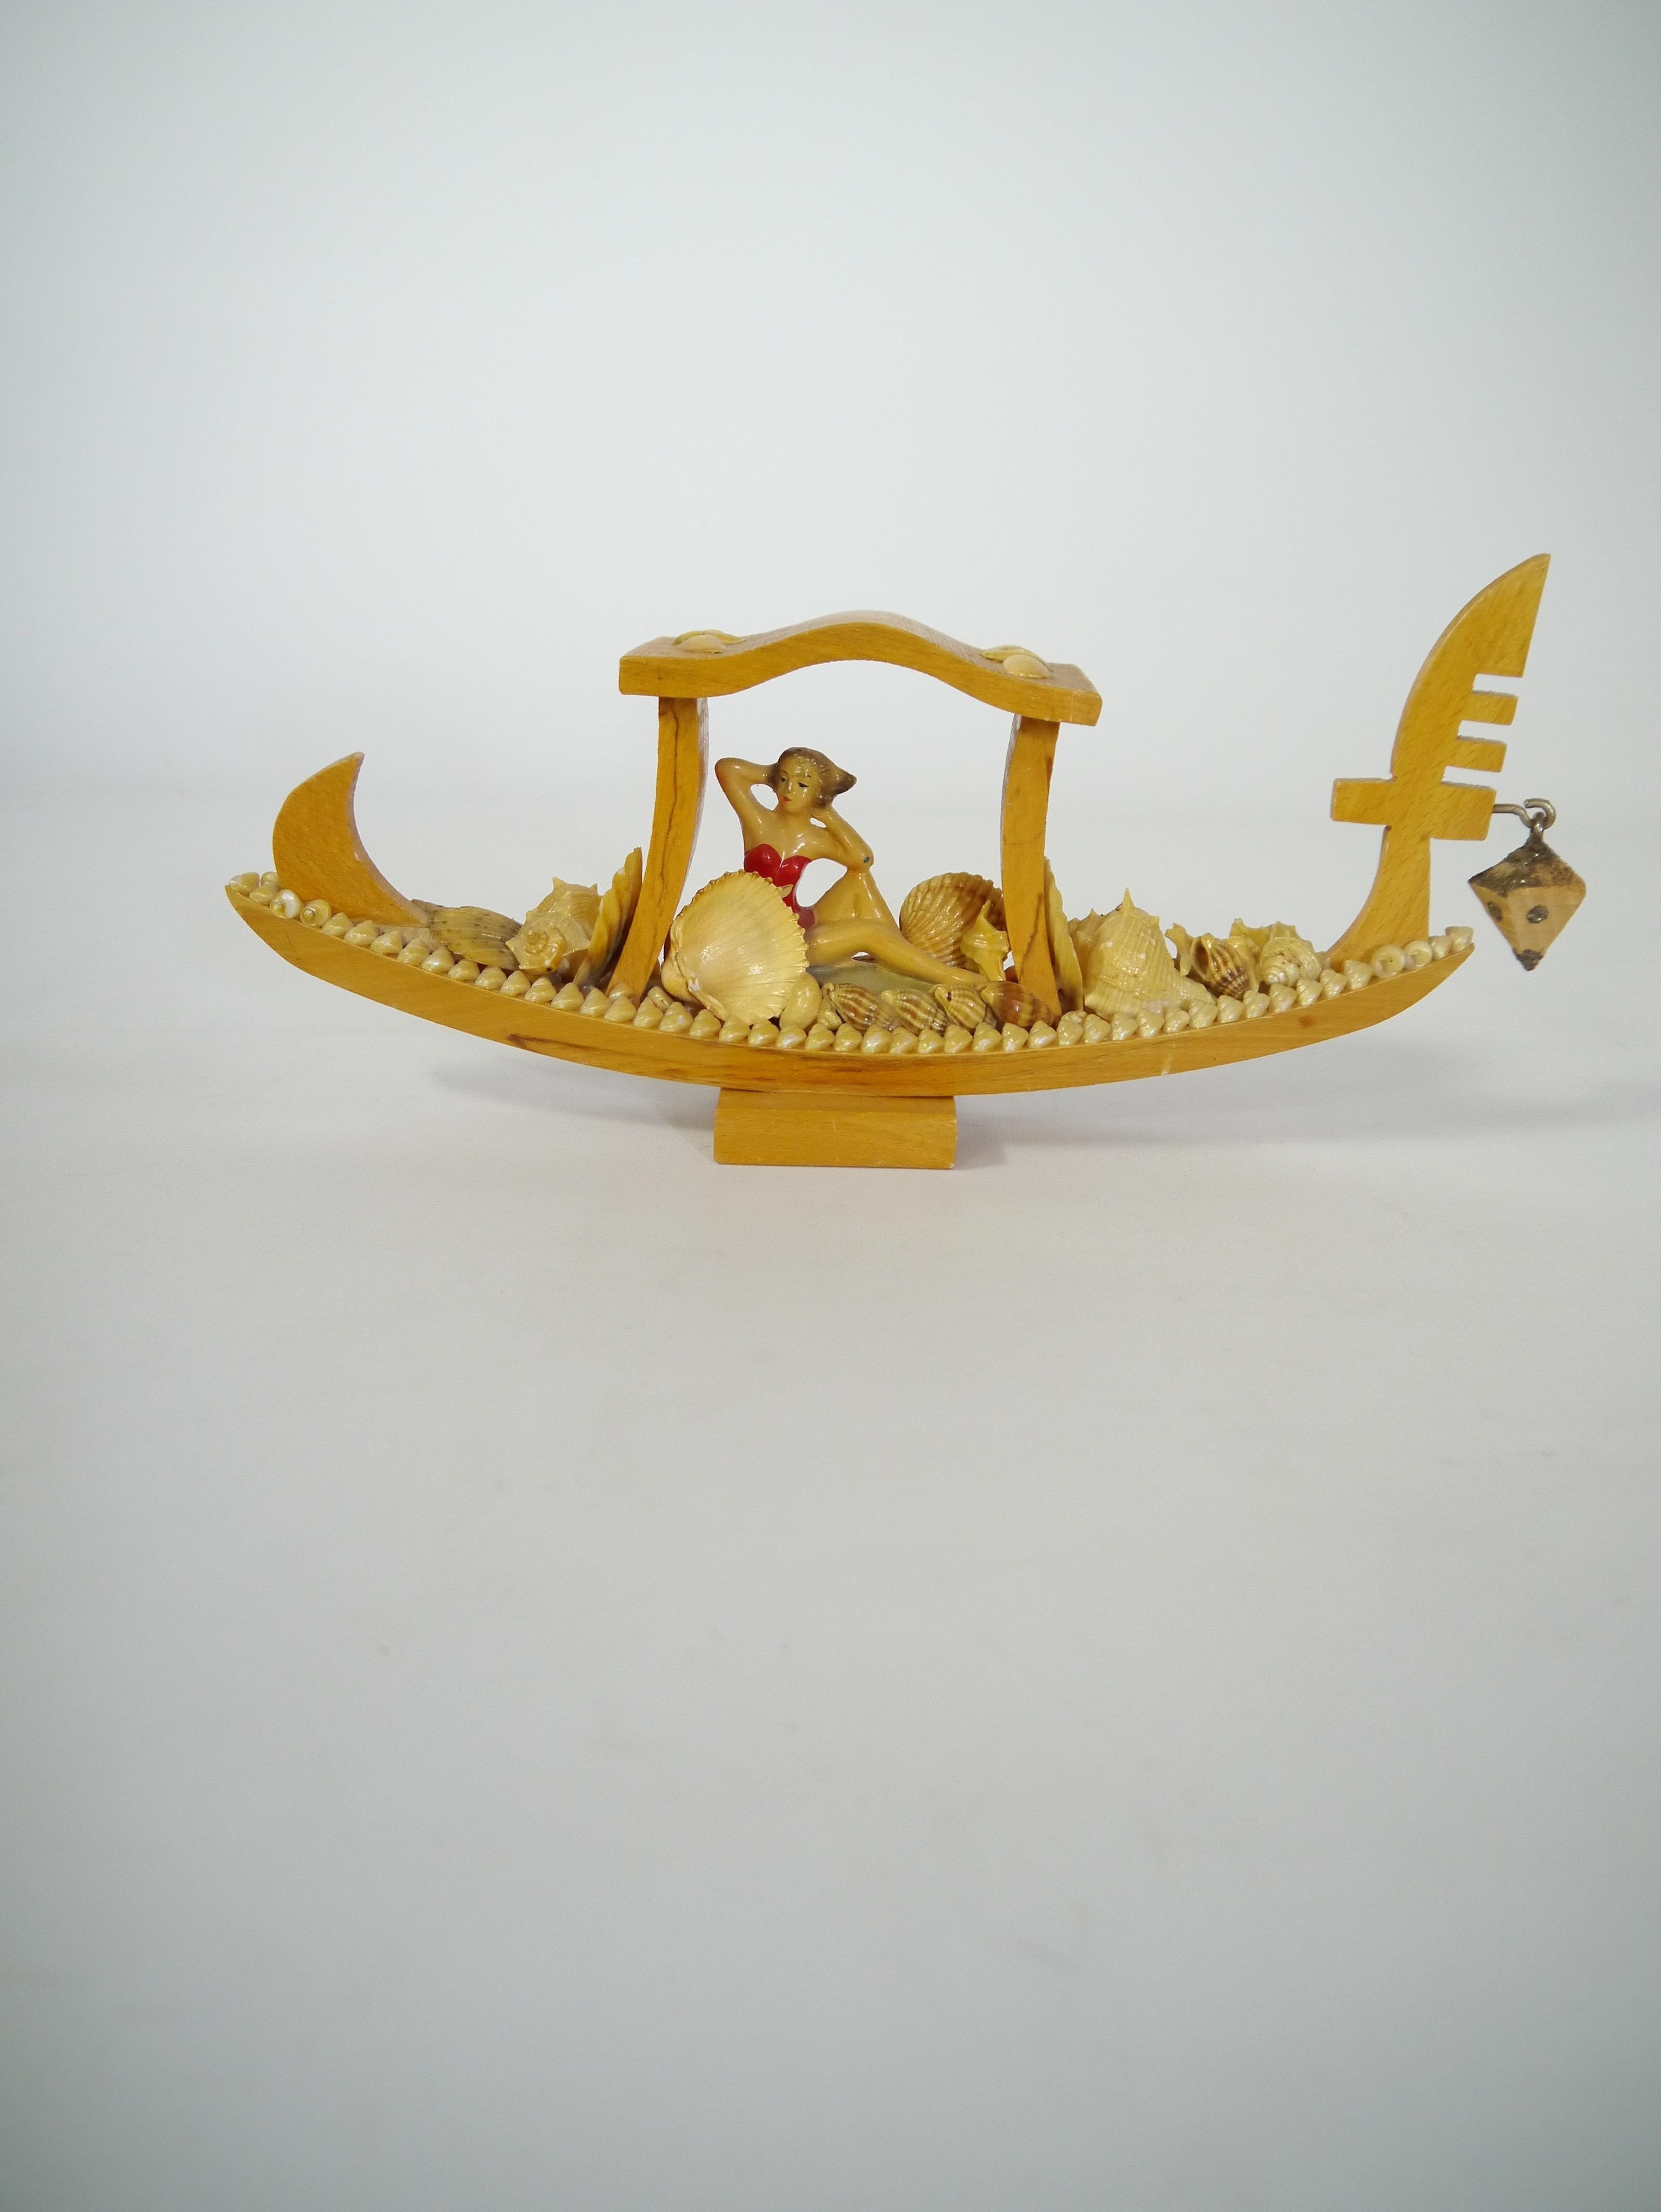 1950s Venice gondola souvenir. Bright wood shellac finish, adorned with seashells and a posing pin-up girl in red swim suit. All very kitsch. Marked 